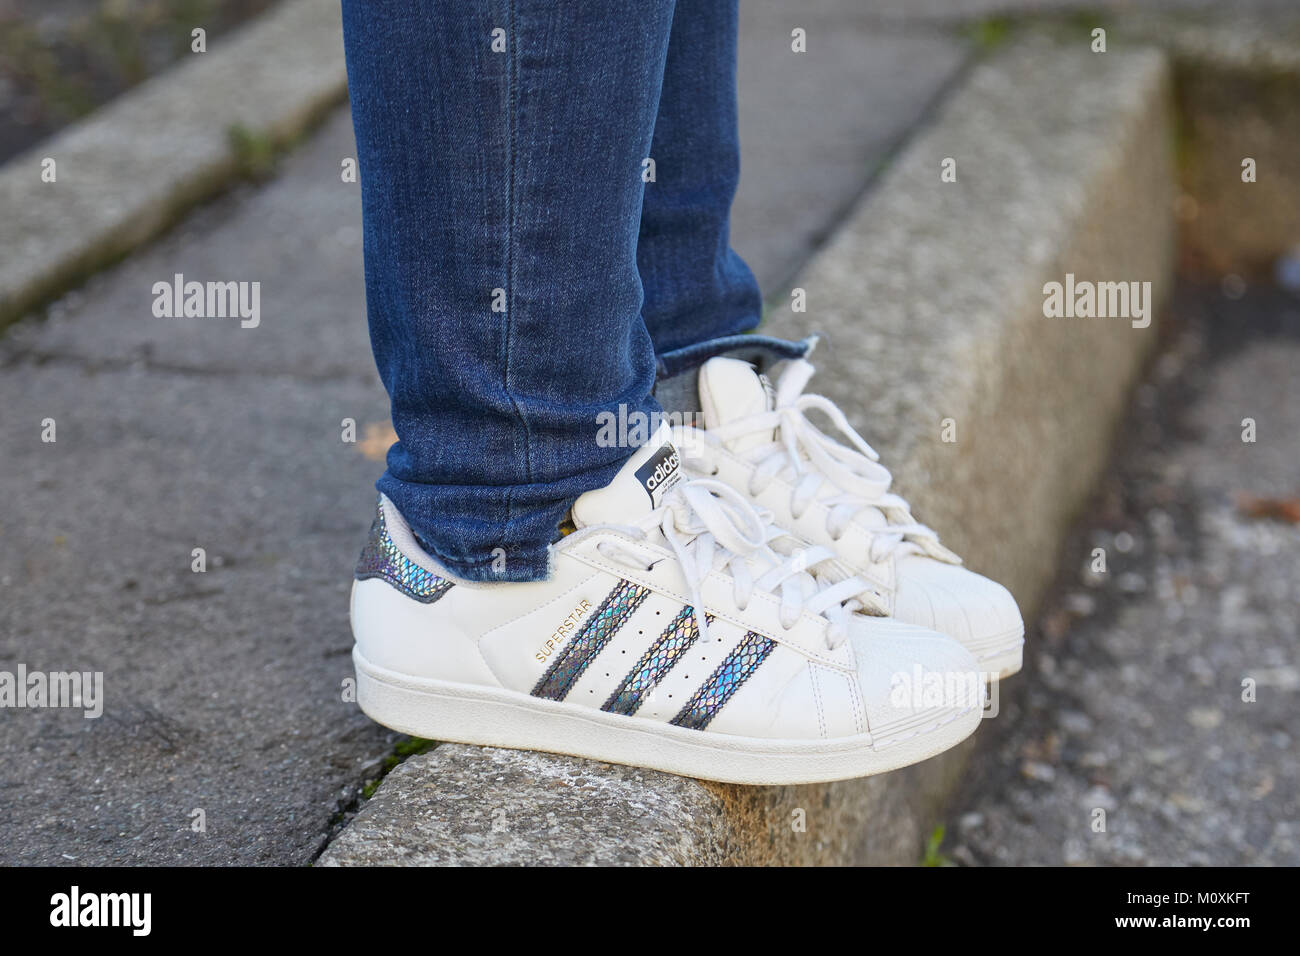 Woman with white leather Adidas shoes 